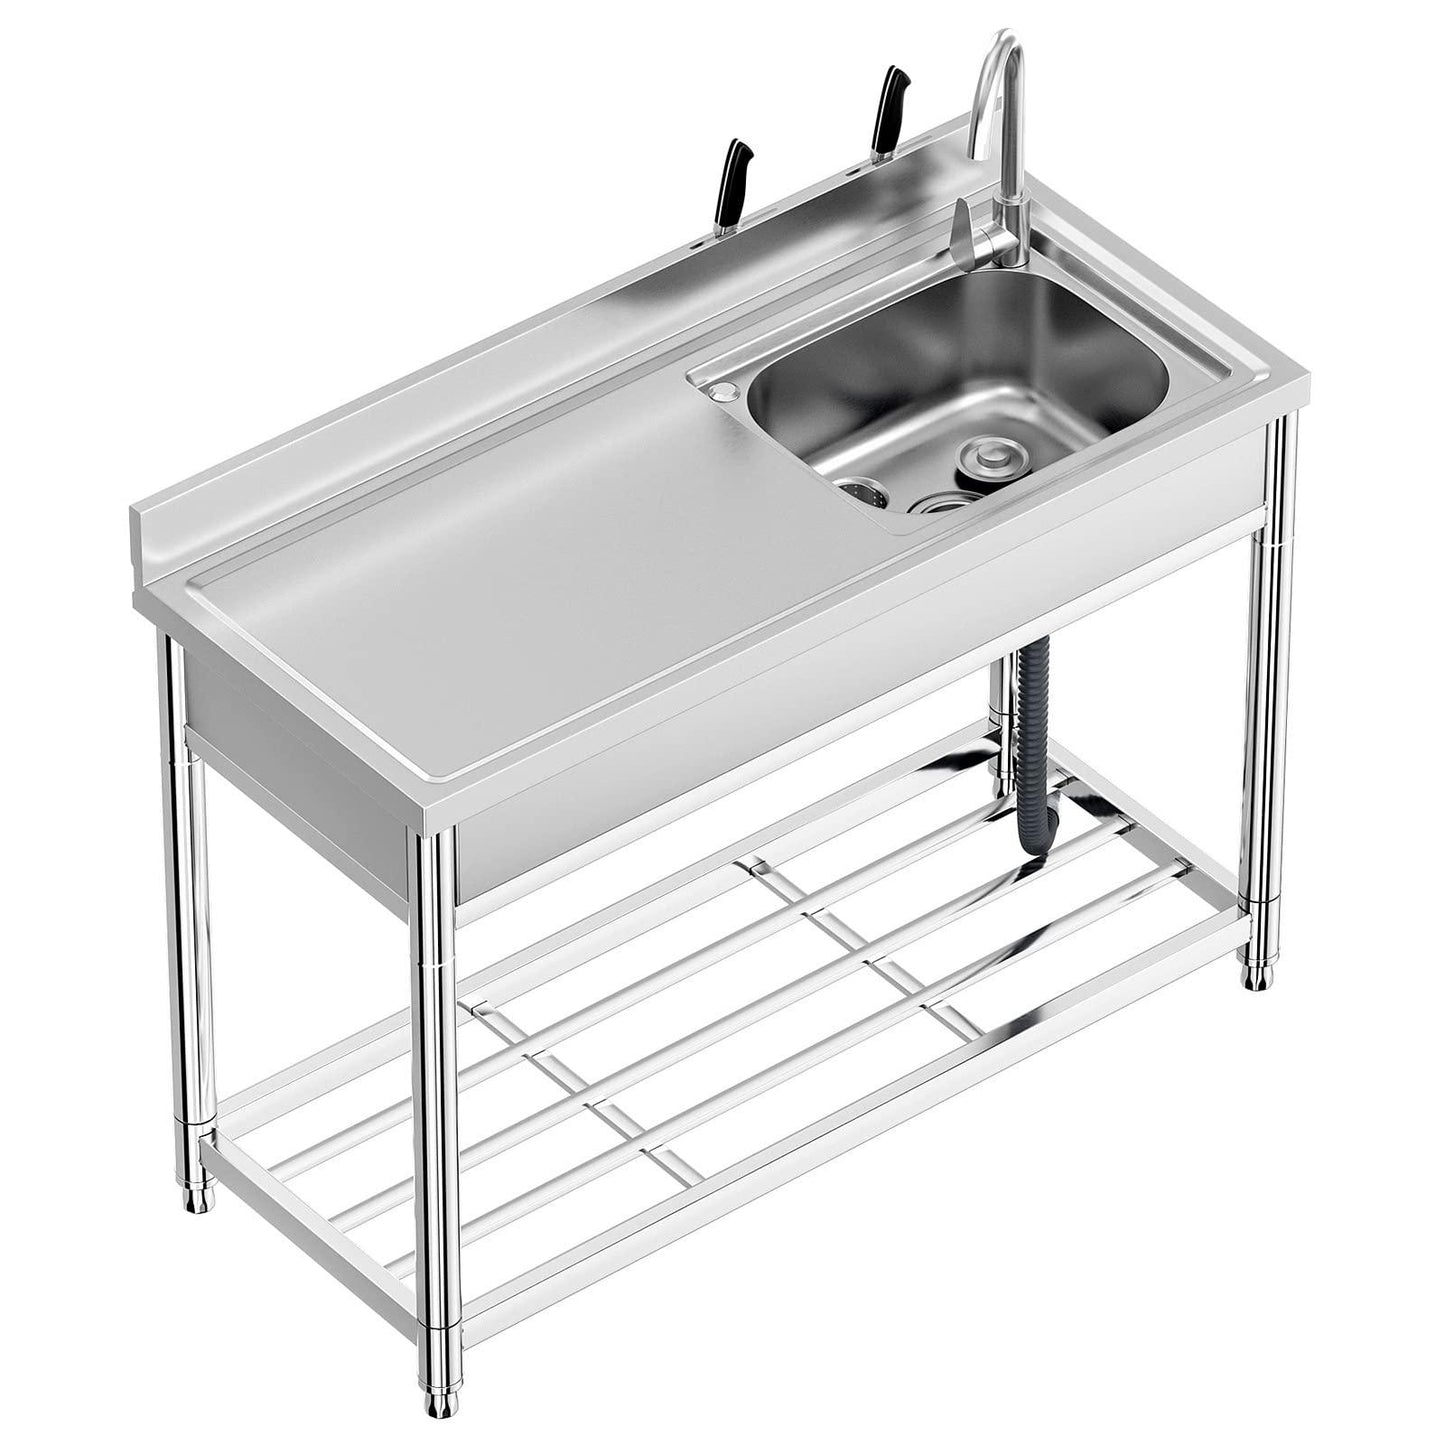 Free Standing Stainless-Steel Single Bowl, Commercial Restaurant Kitchen Sink Set w/Faucet & Drainboard, Prep & Utility Washing Hand Basin w/Workbench & Storage Shelves Indoor Outdoor (47in) - CookCave